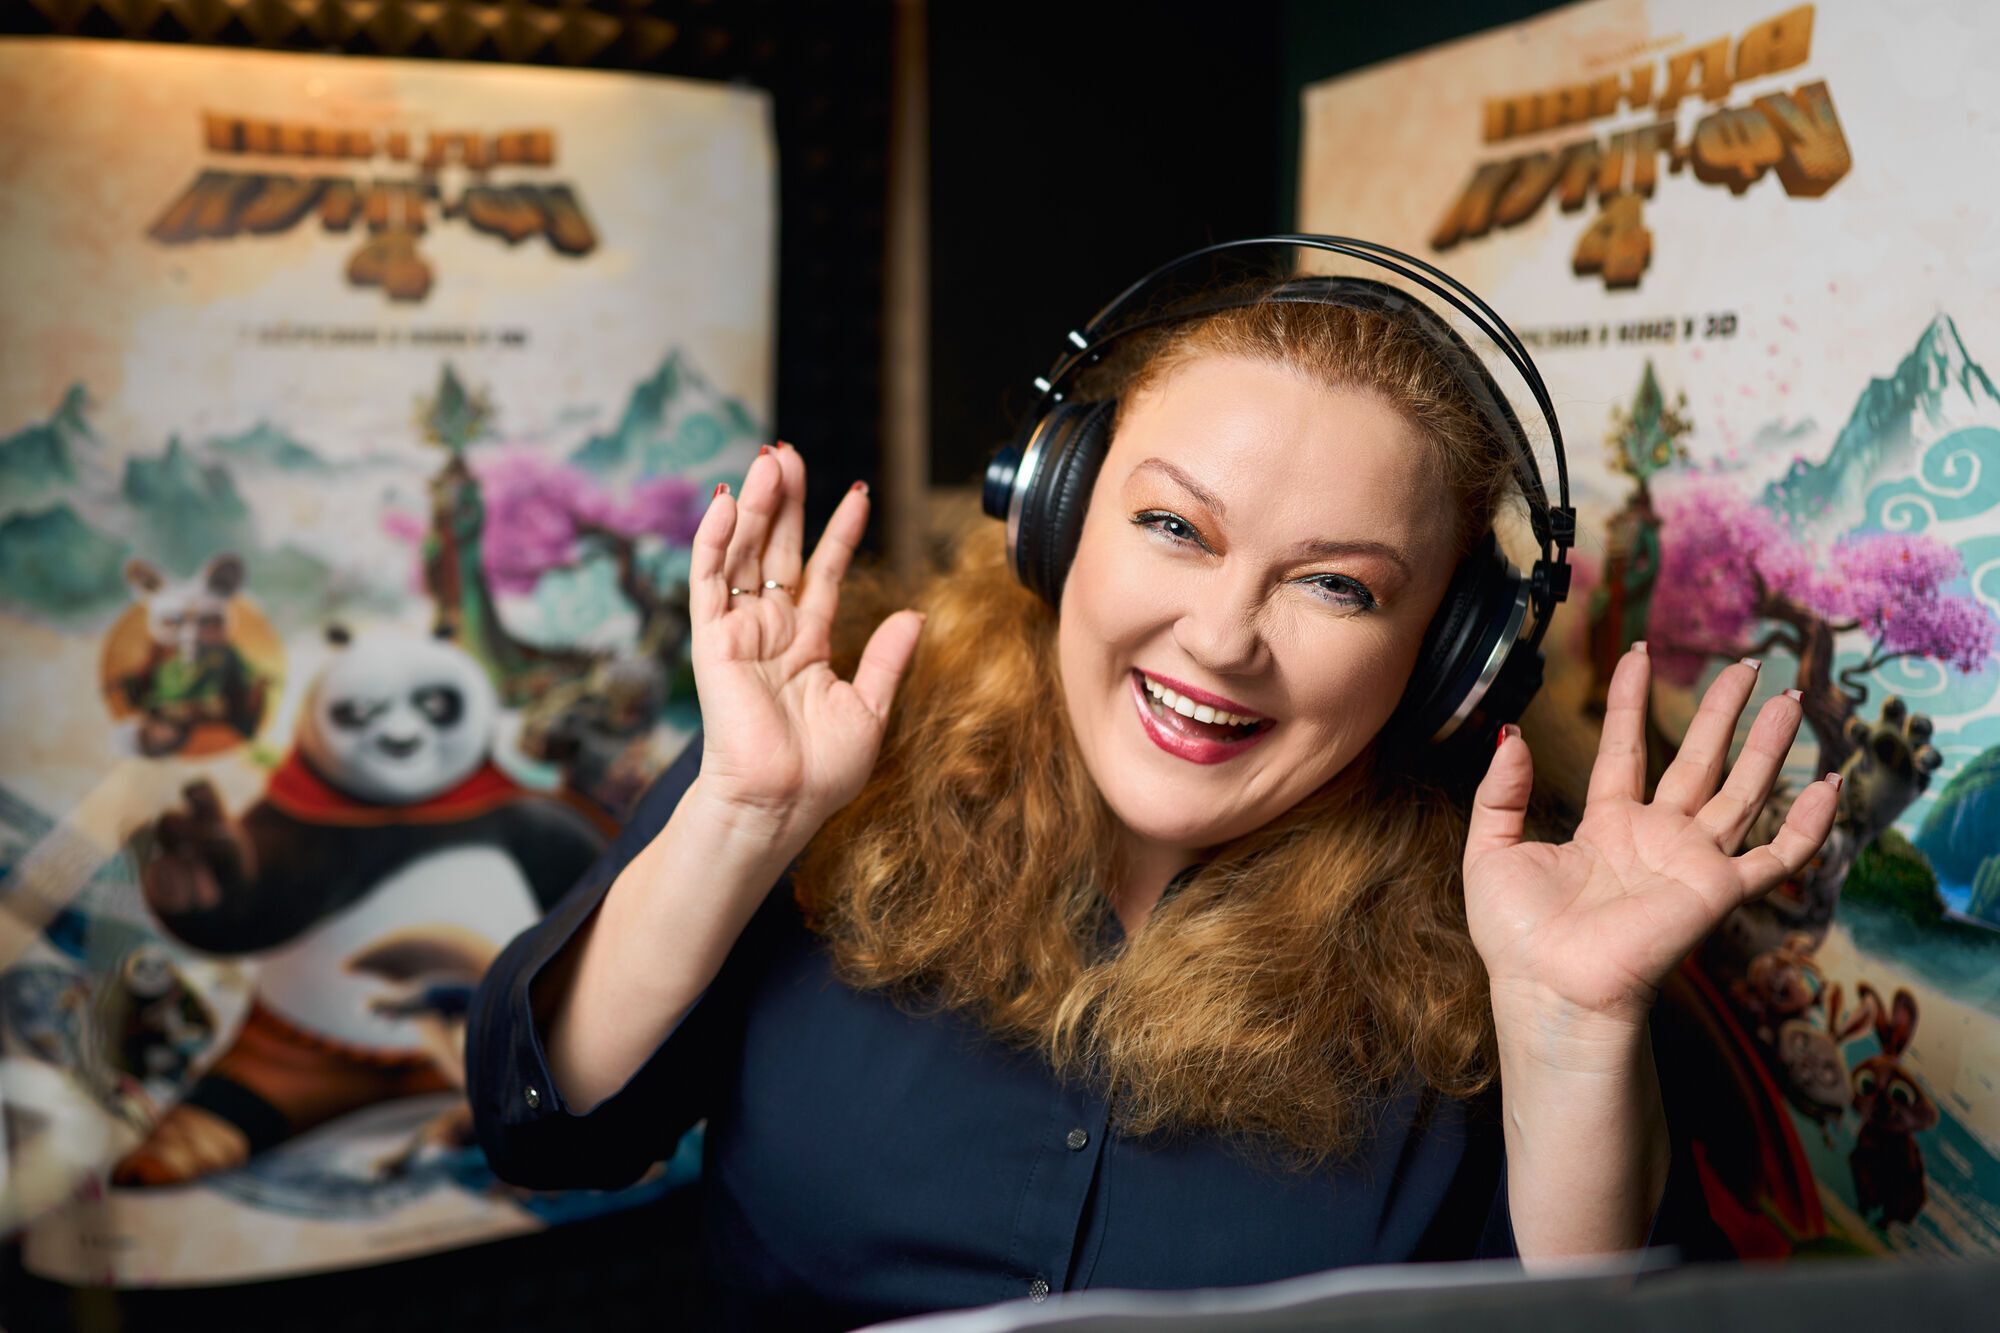 Ukrainian stars joined the dubbing of Kung Fu Panda 4 characters: who voiced whom